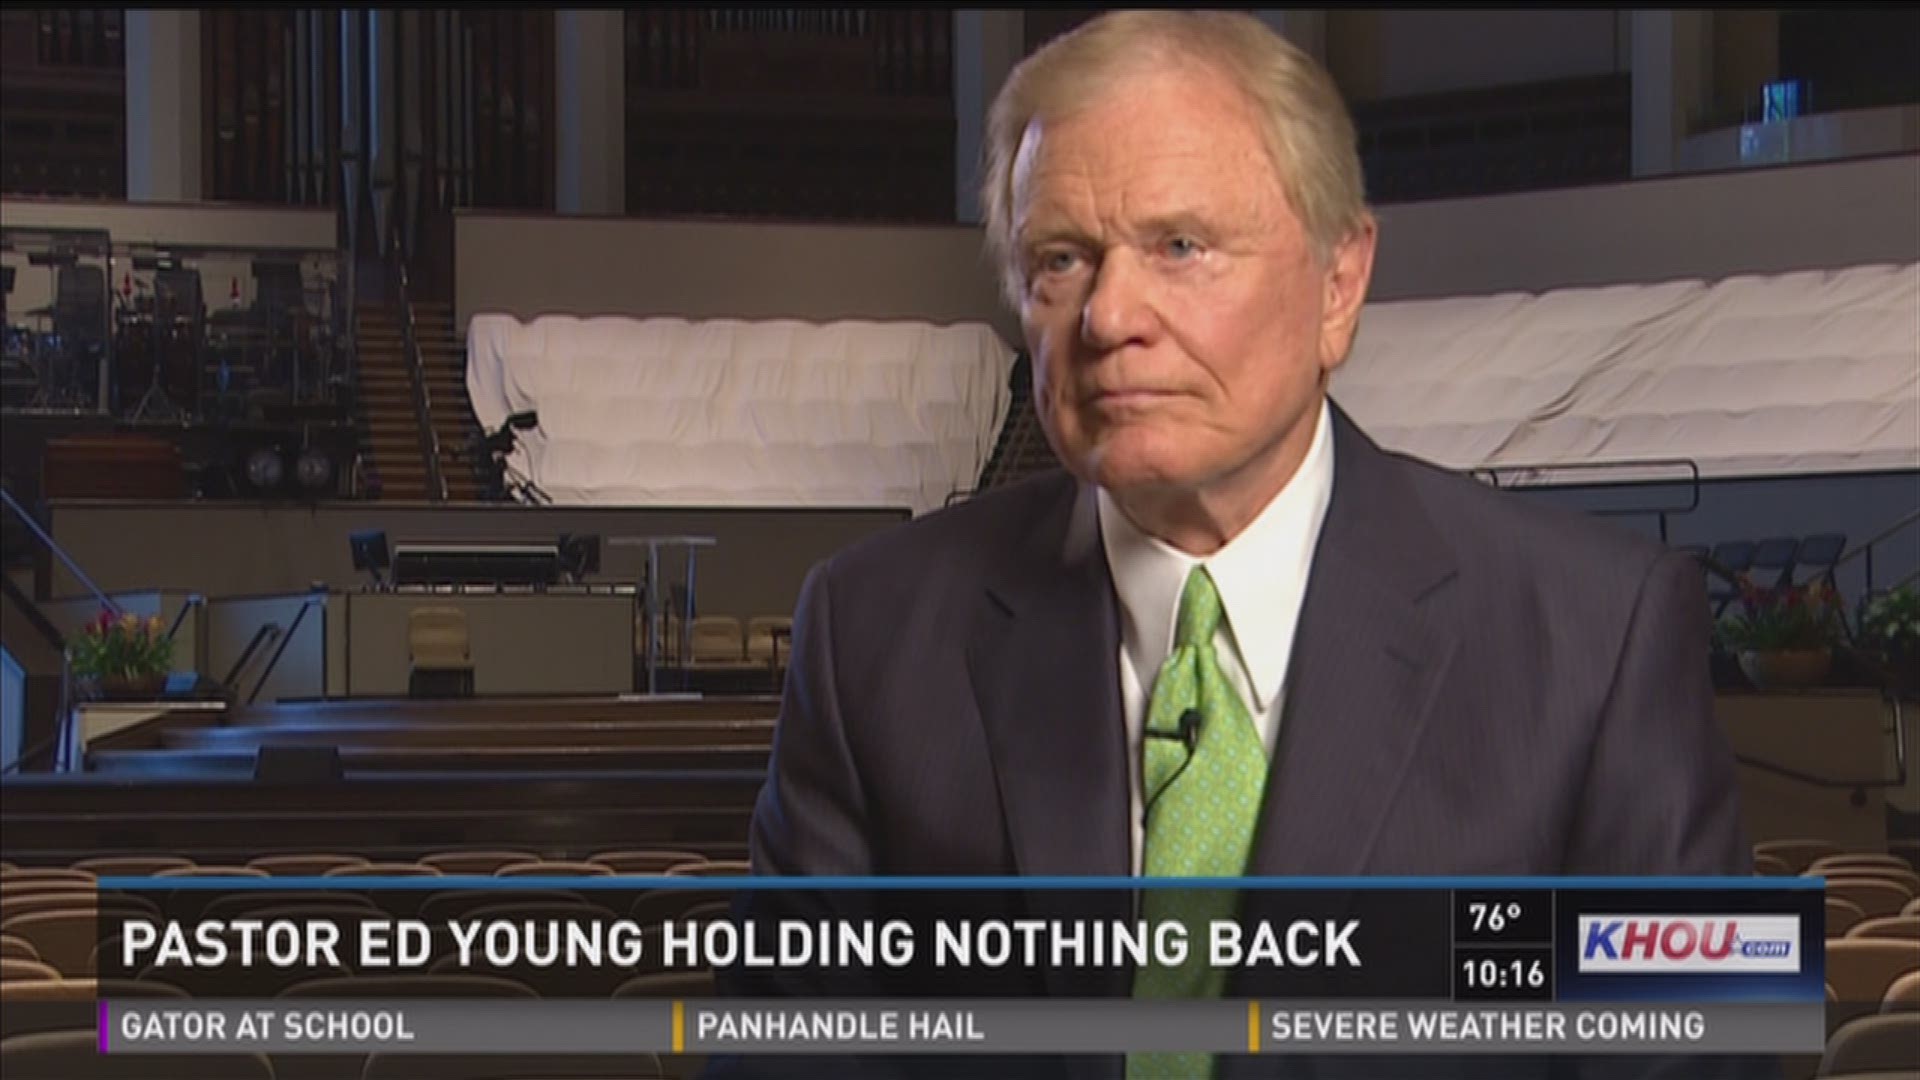 Len Cannon interviews Second Baptist Church pastor Ed Young who holds nothing back on controversial issues.